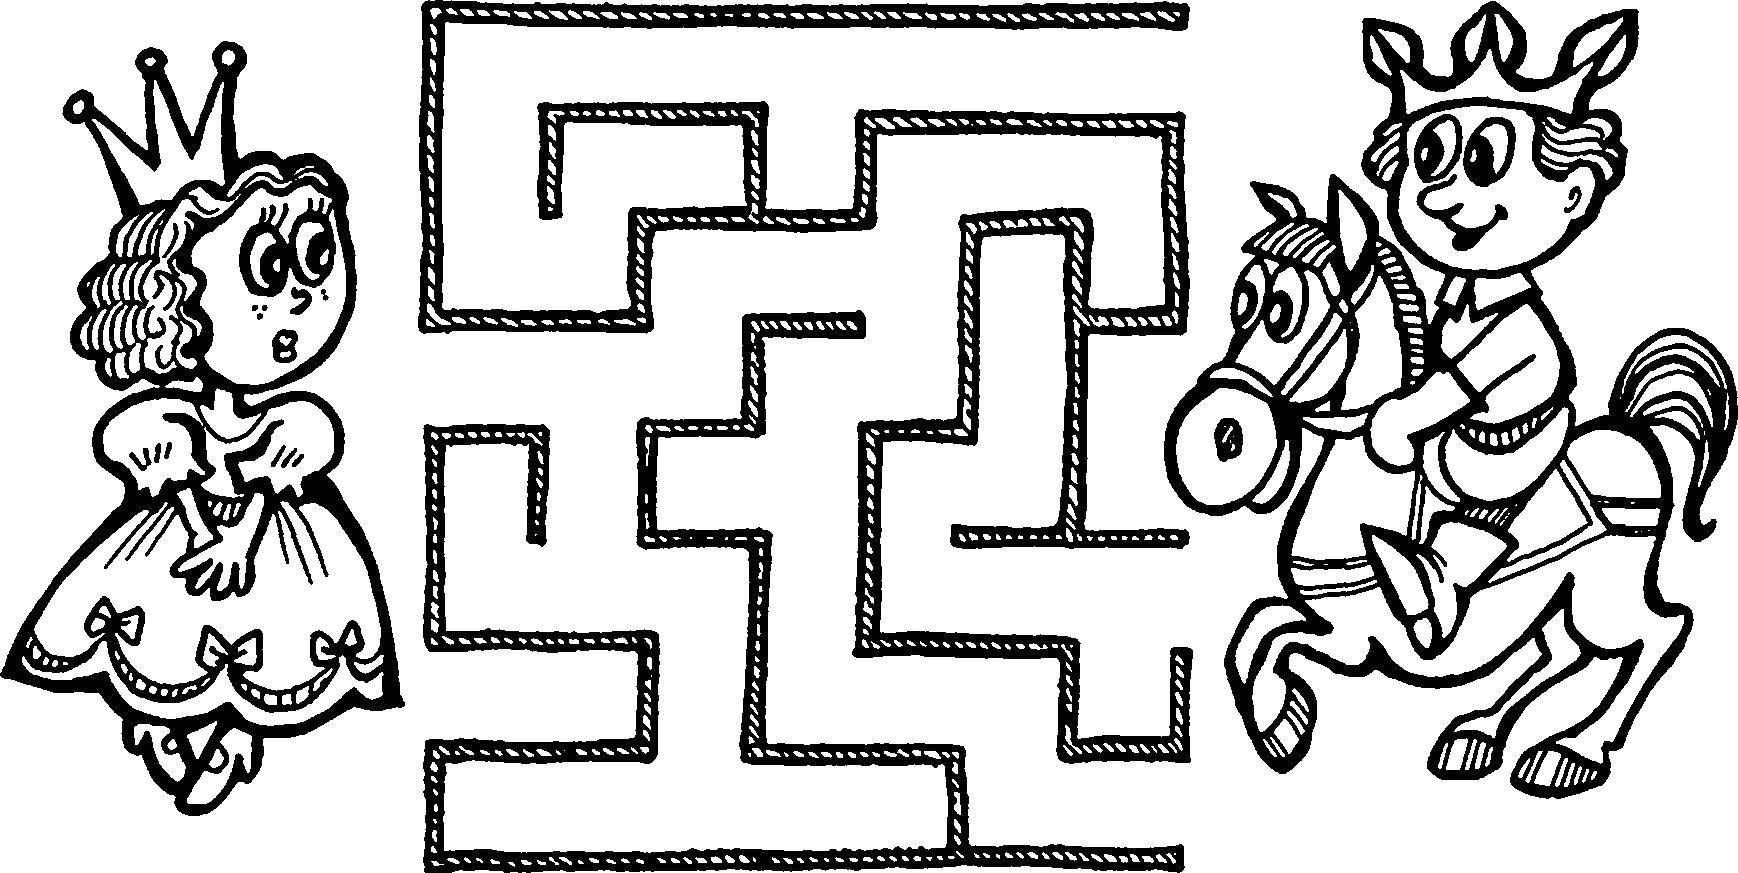 Coloring Help the Prince to reach the Princess. Category mazes. Tags:  Maze, logic.